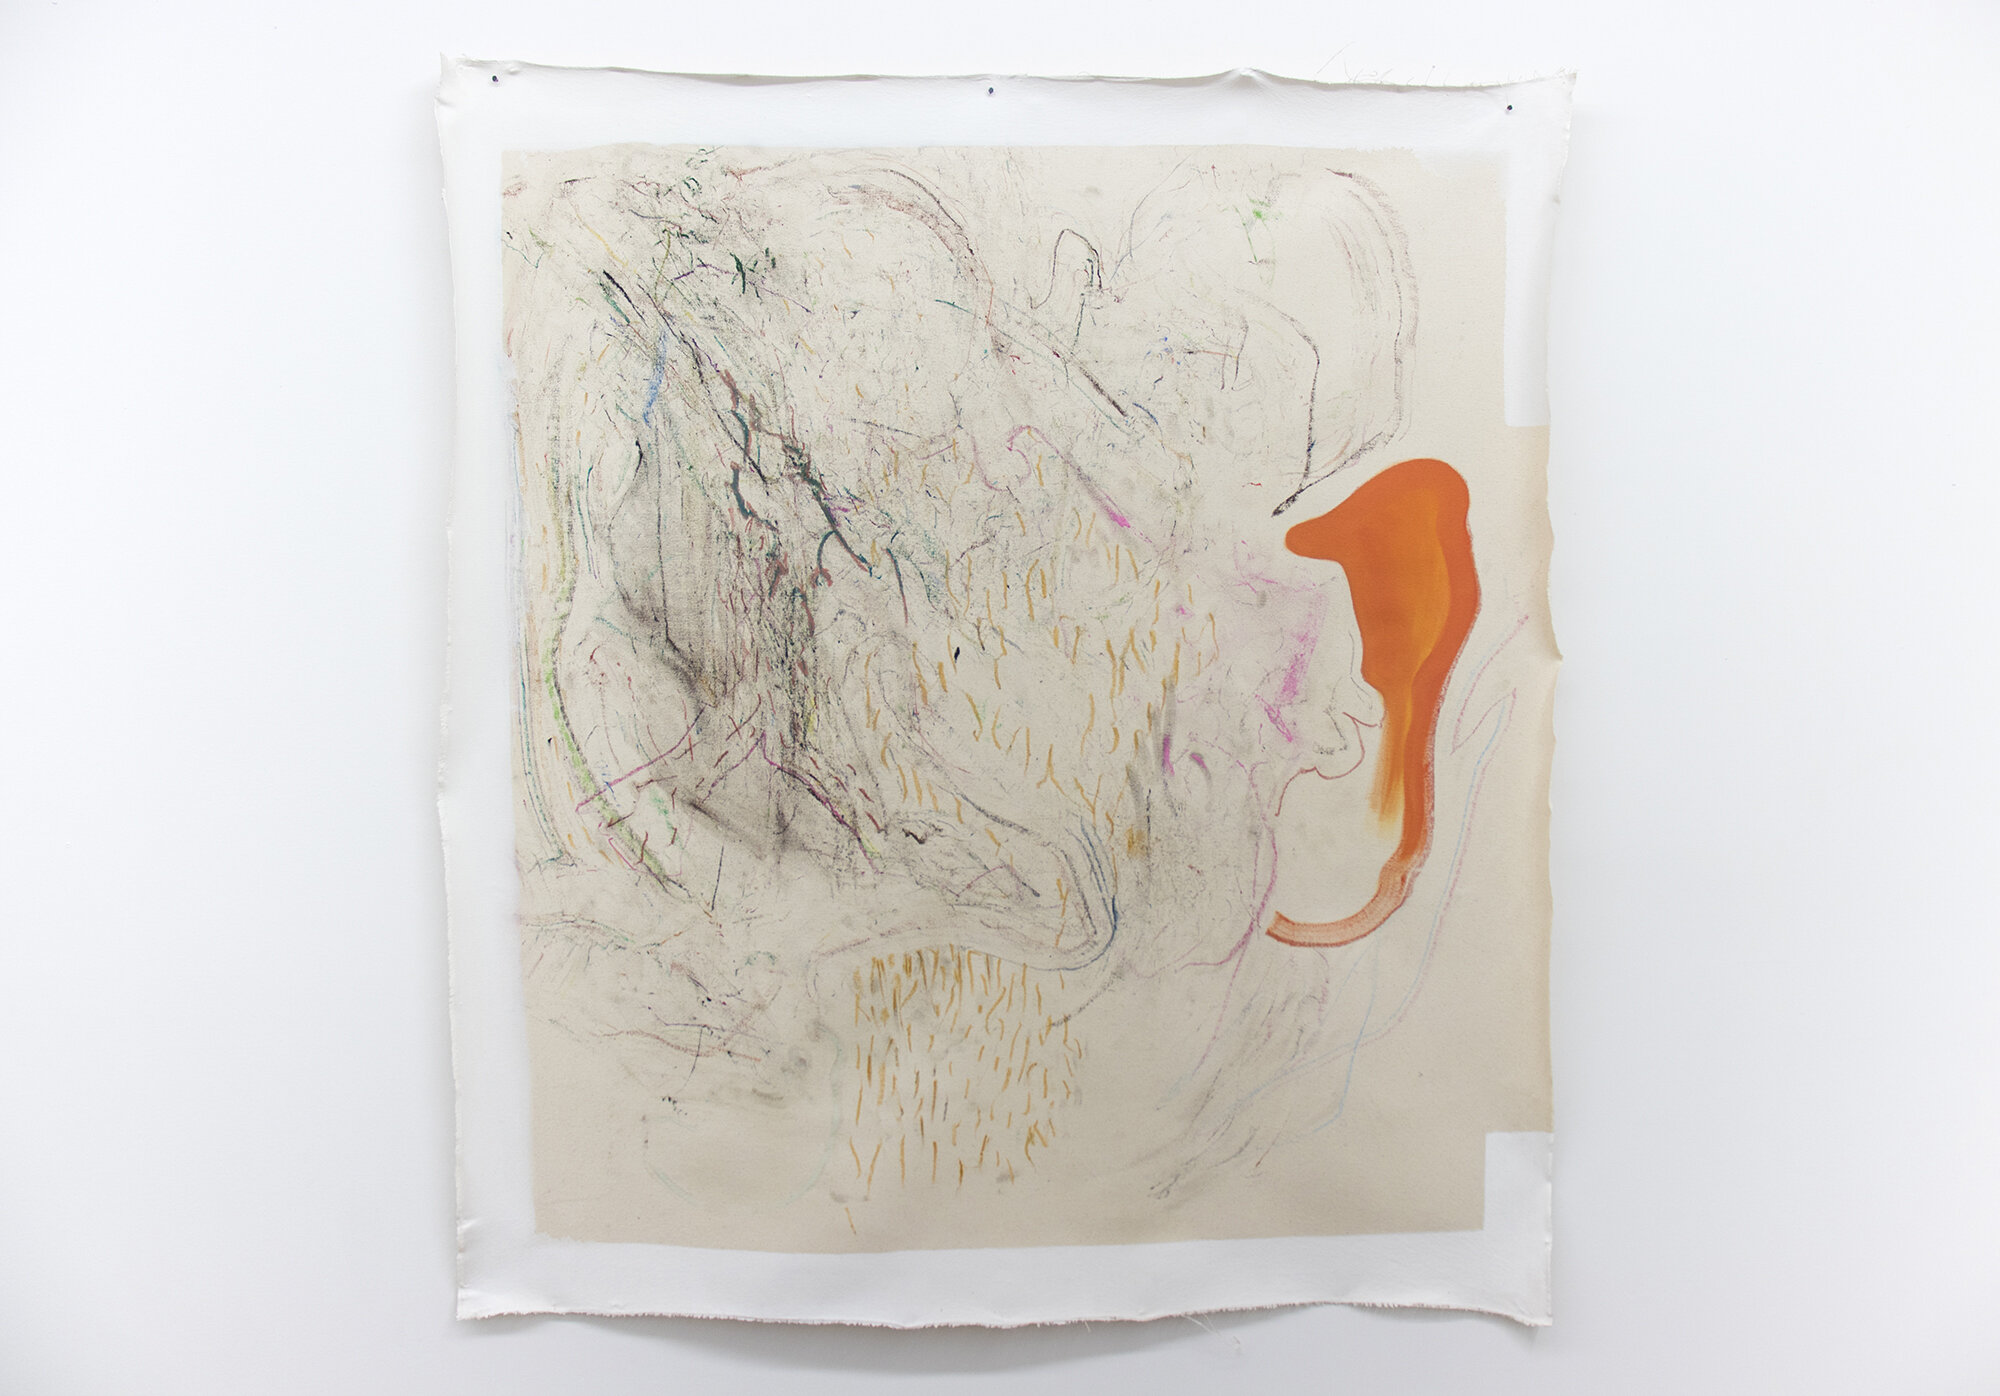  August Vollbrecht  Babyfood , 2019 oil, graphite, drawing media, rabbit skin glue on unstretched canvas 52 x 47 inches (132 x 119 cm) (AV60) 